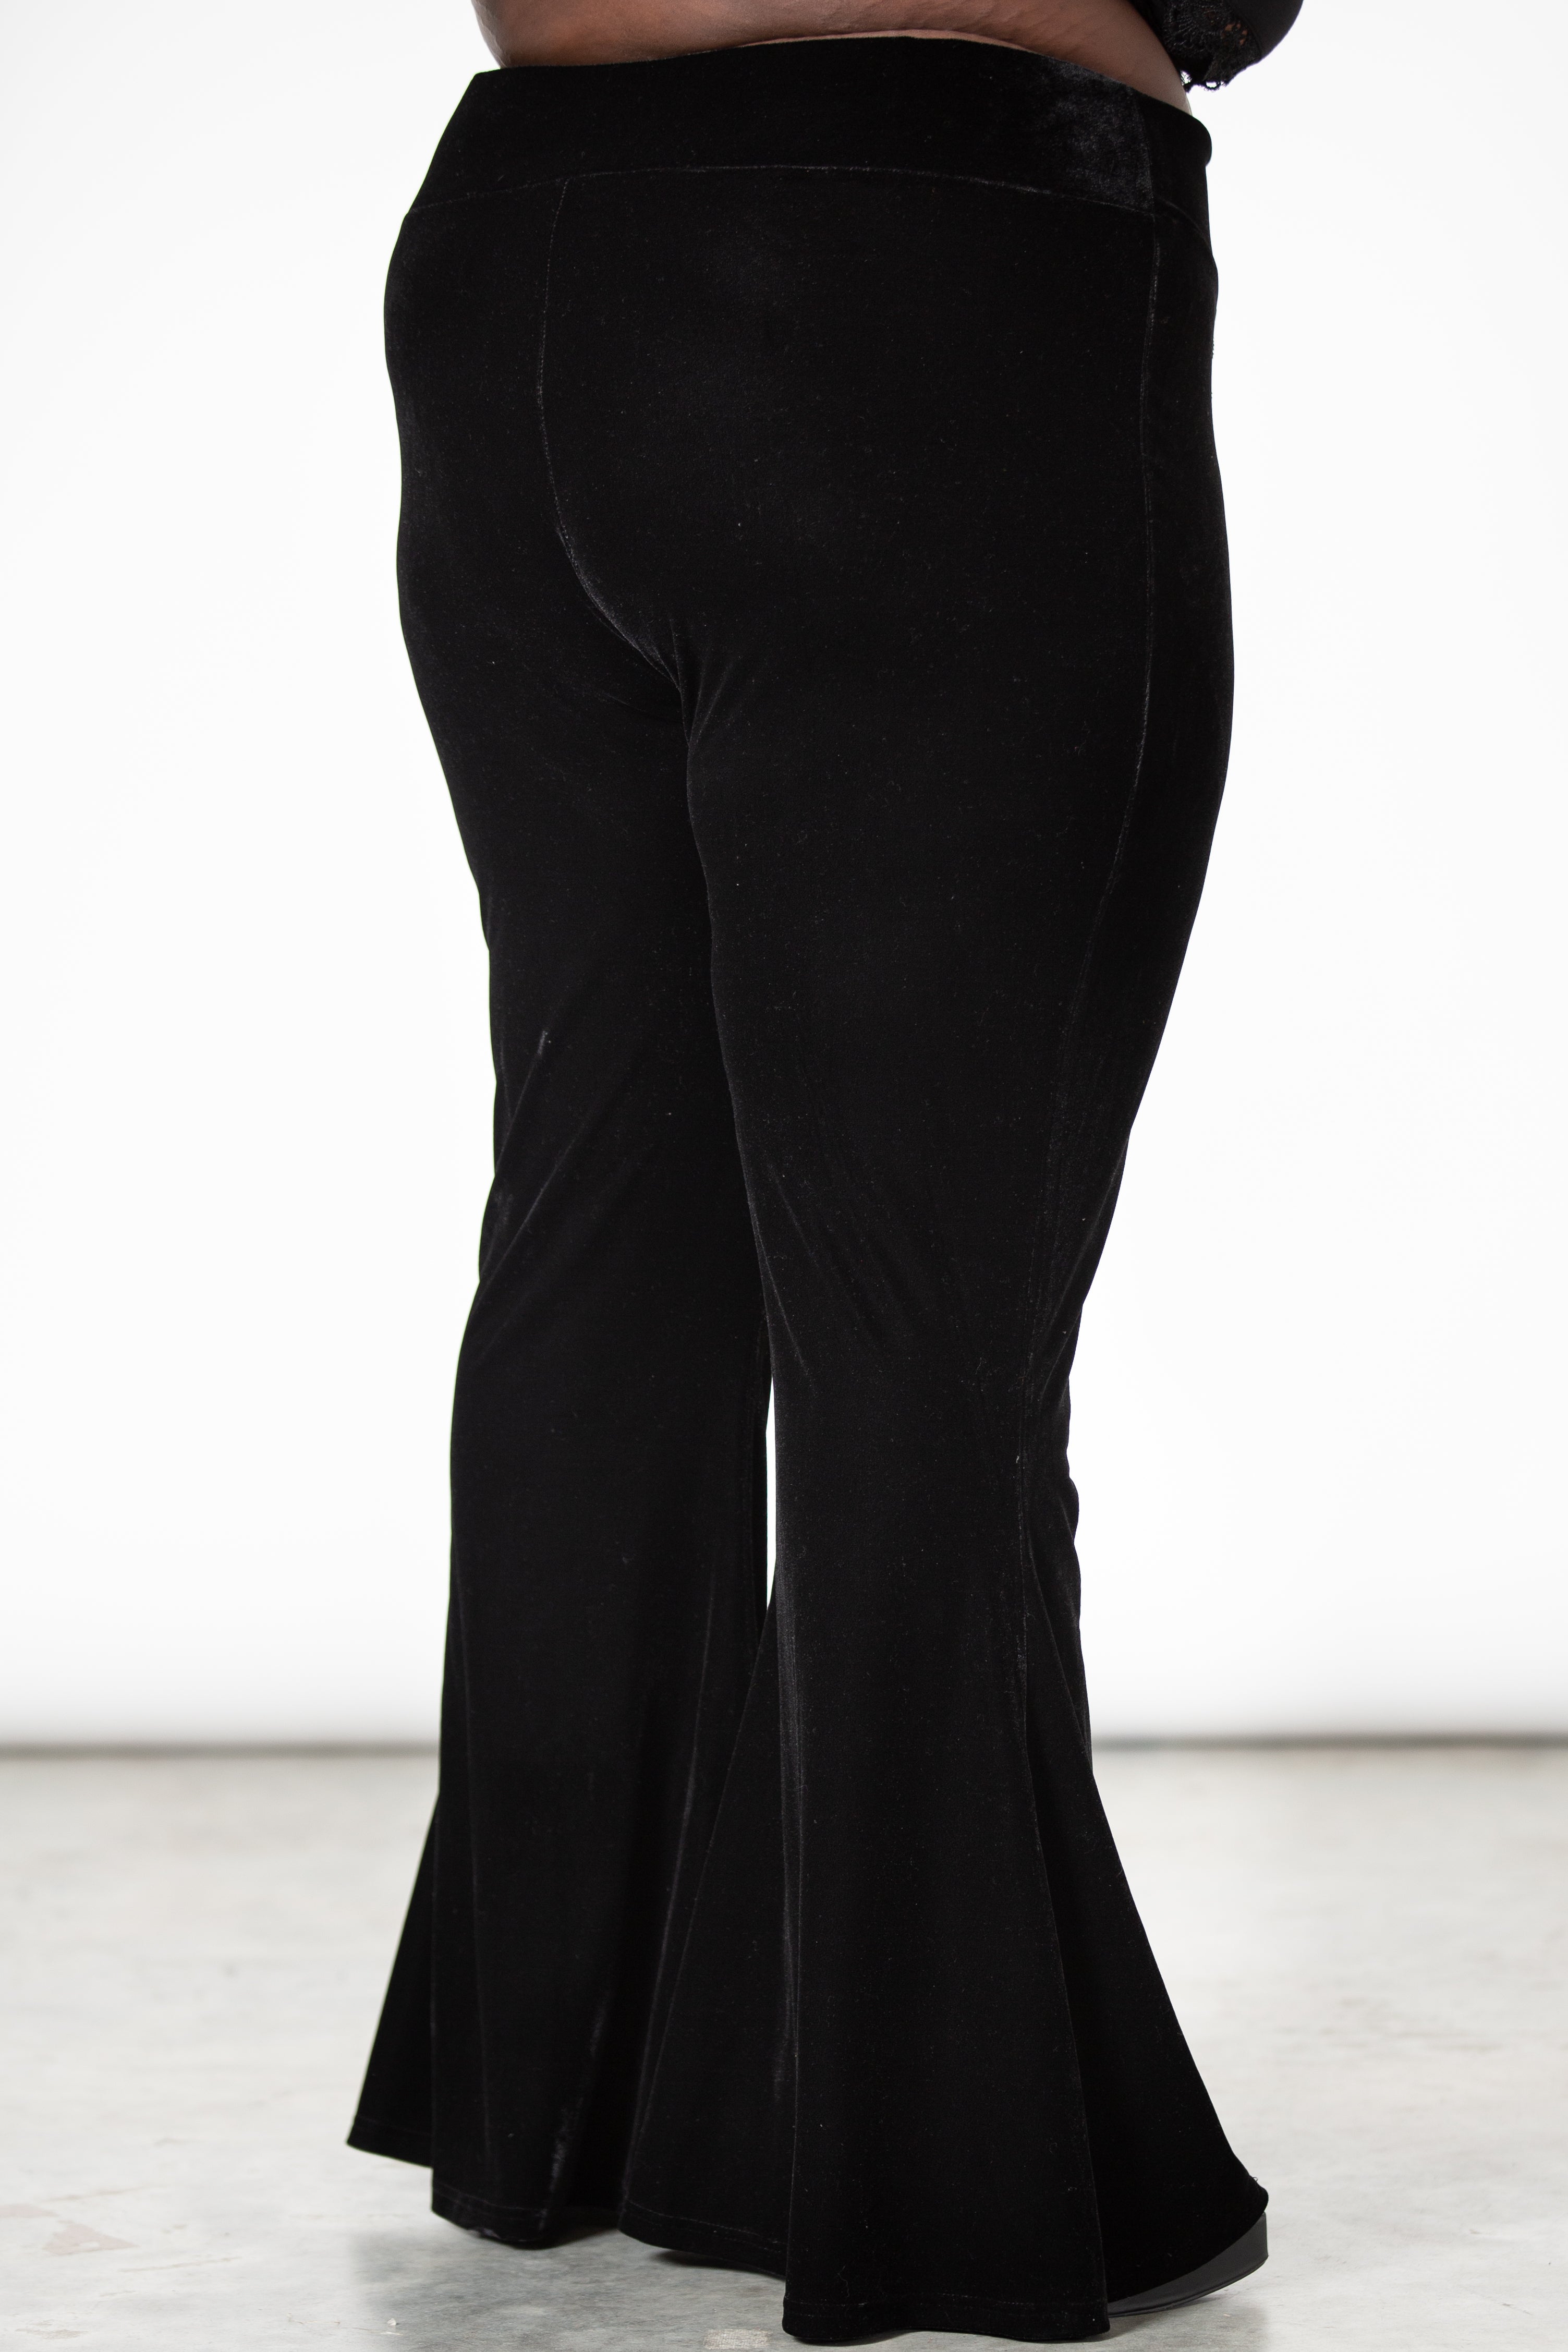 Double Layered Bell Bottom Pants